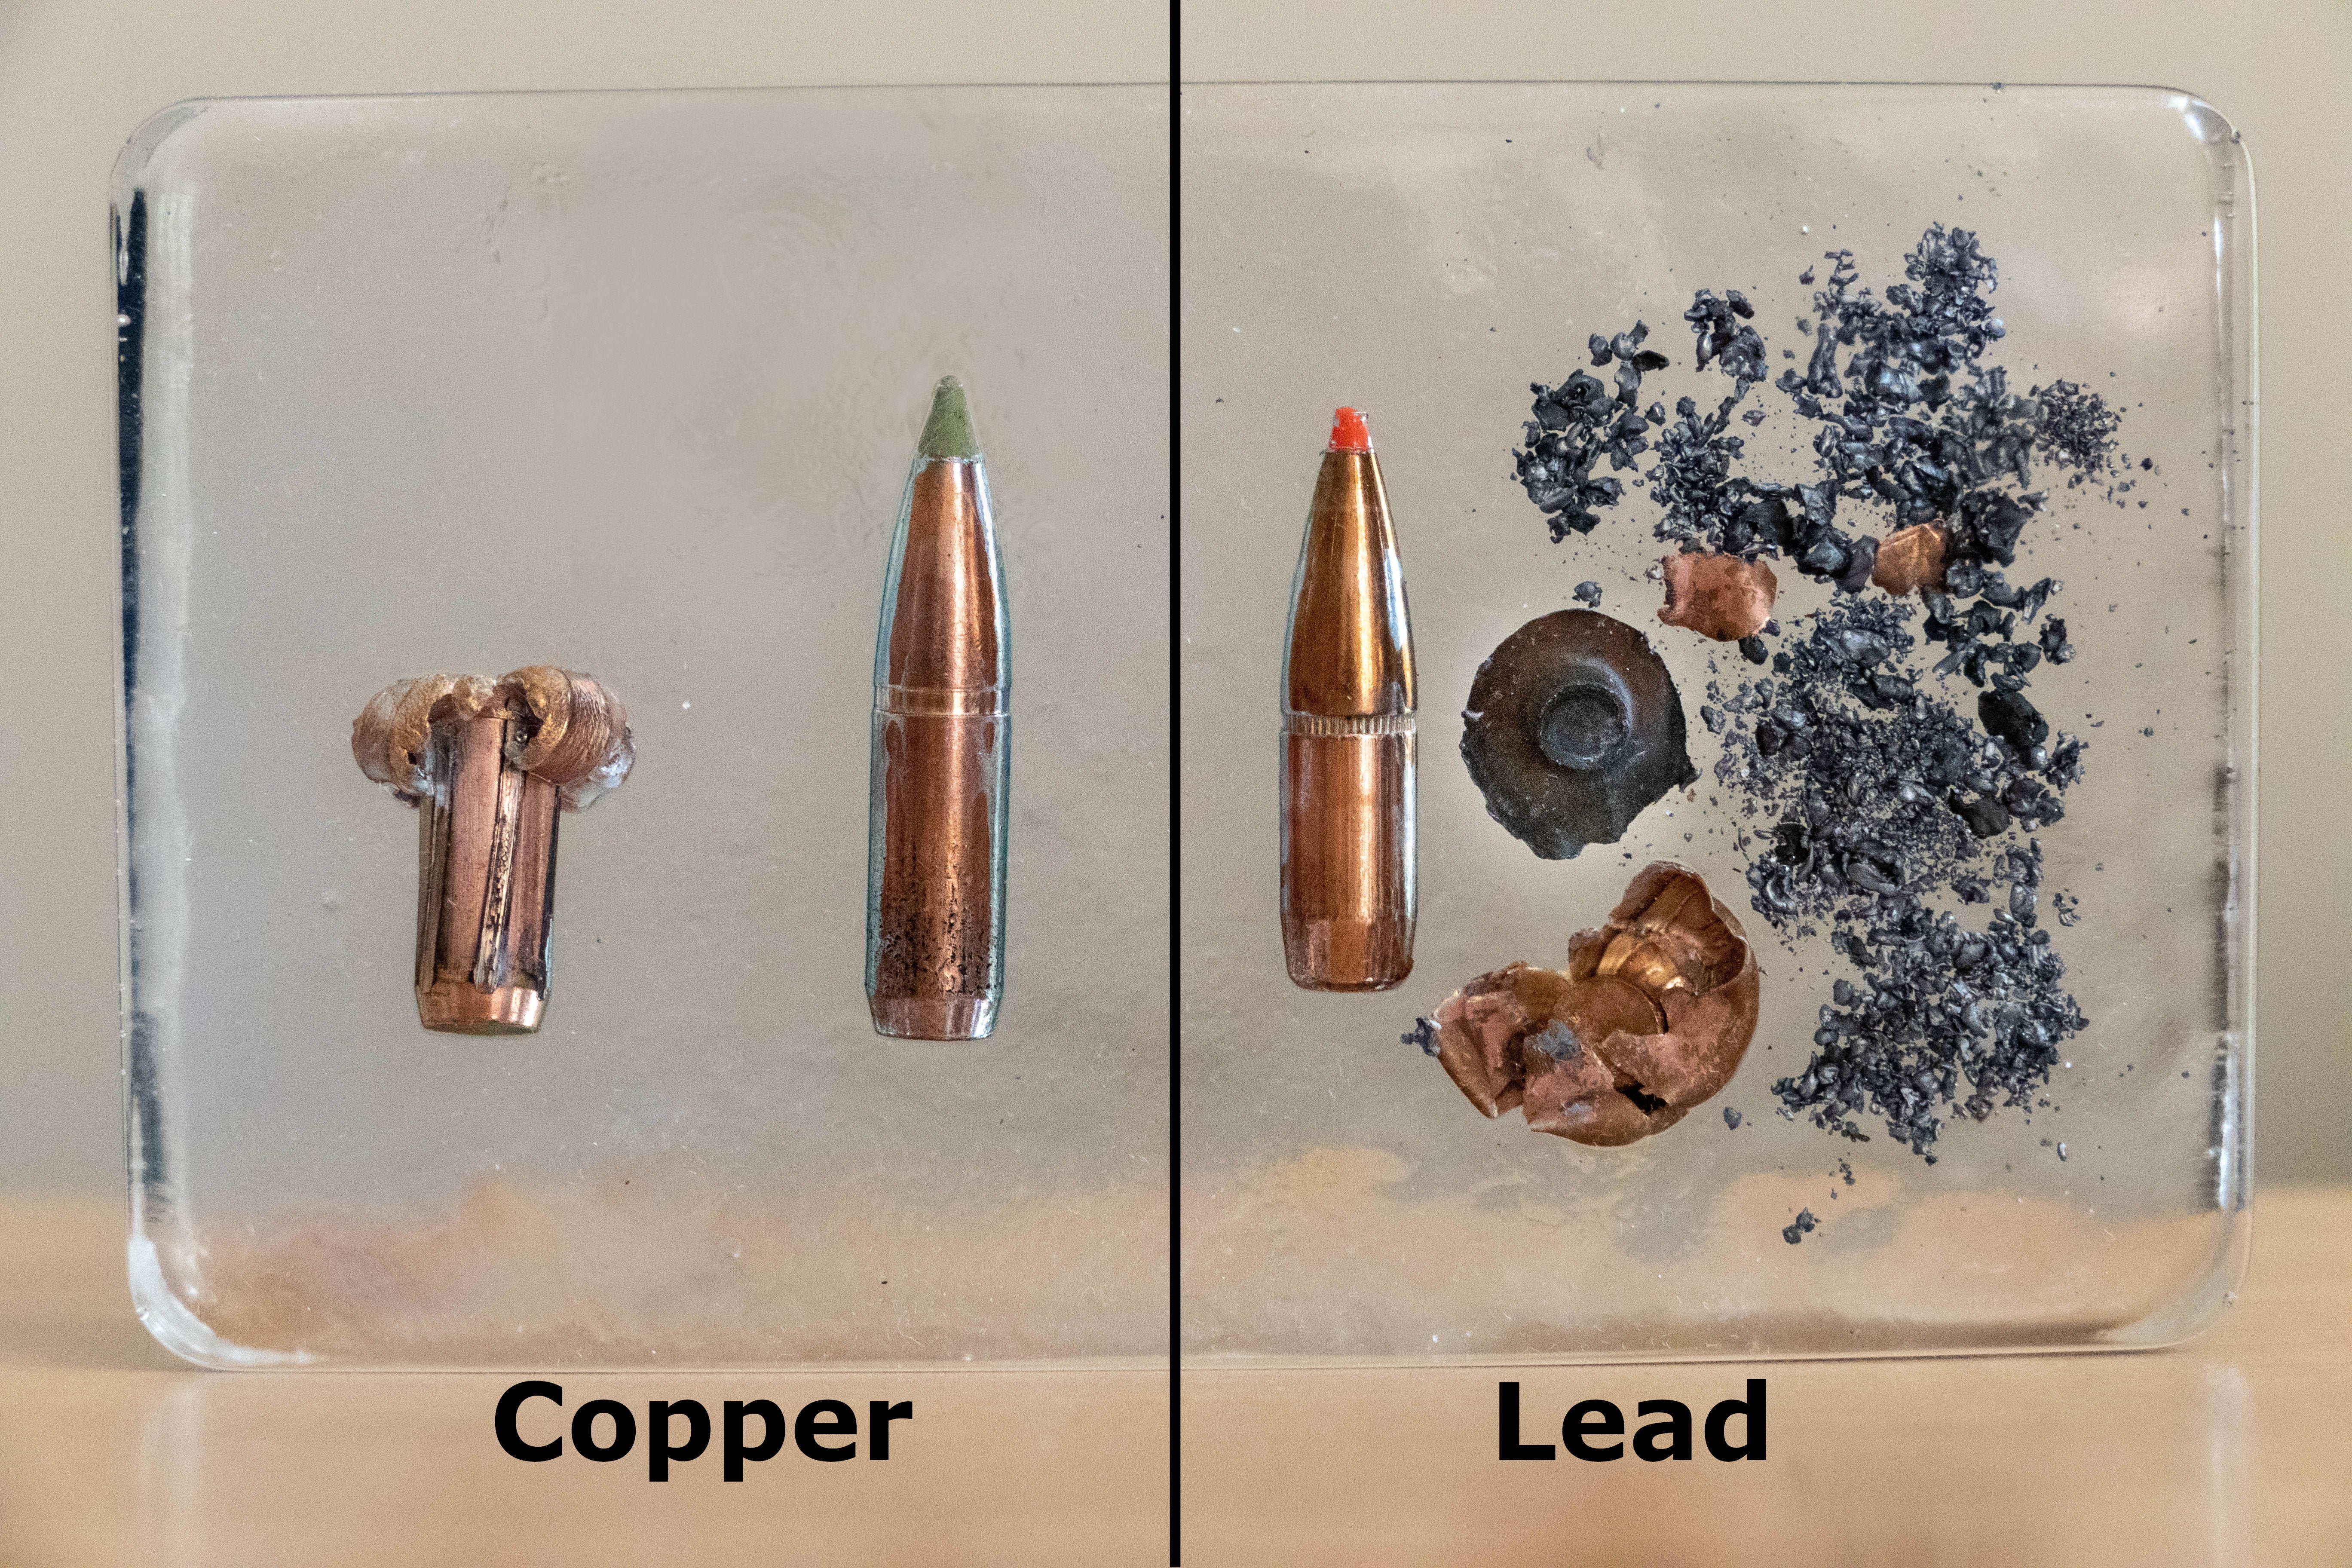 Tray showing an unexploded and exploded bullet side by side